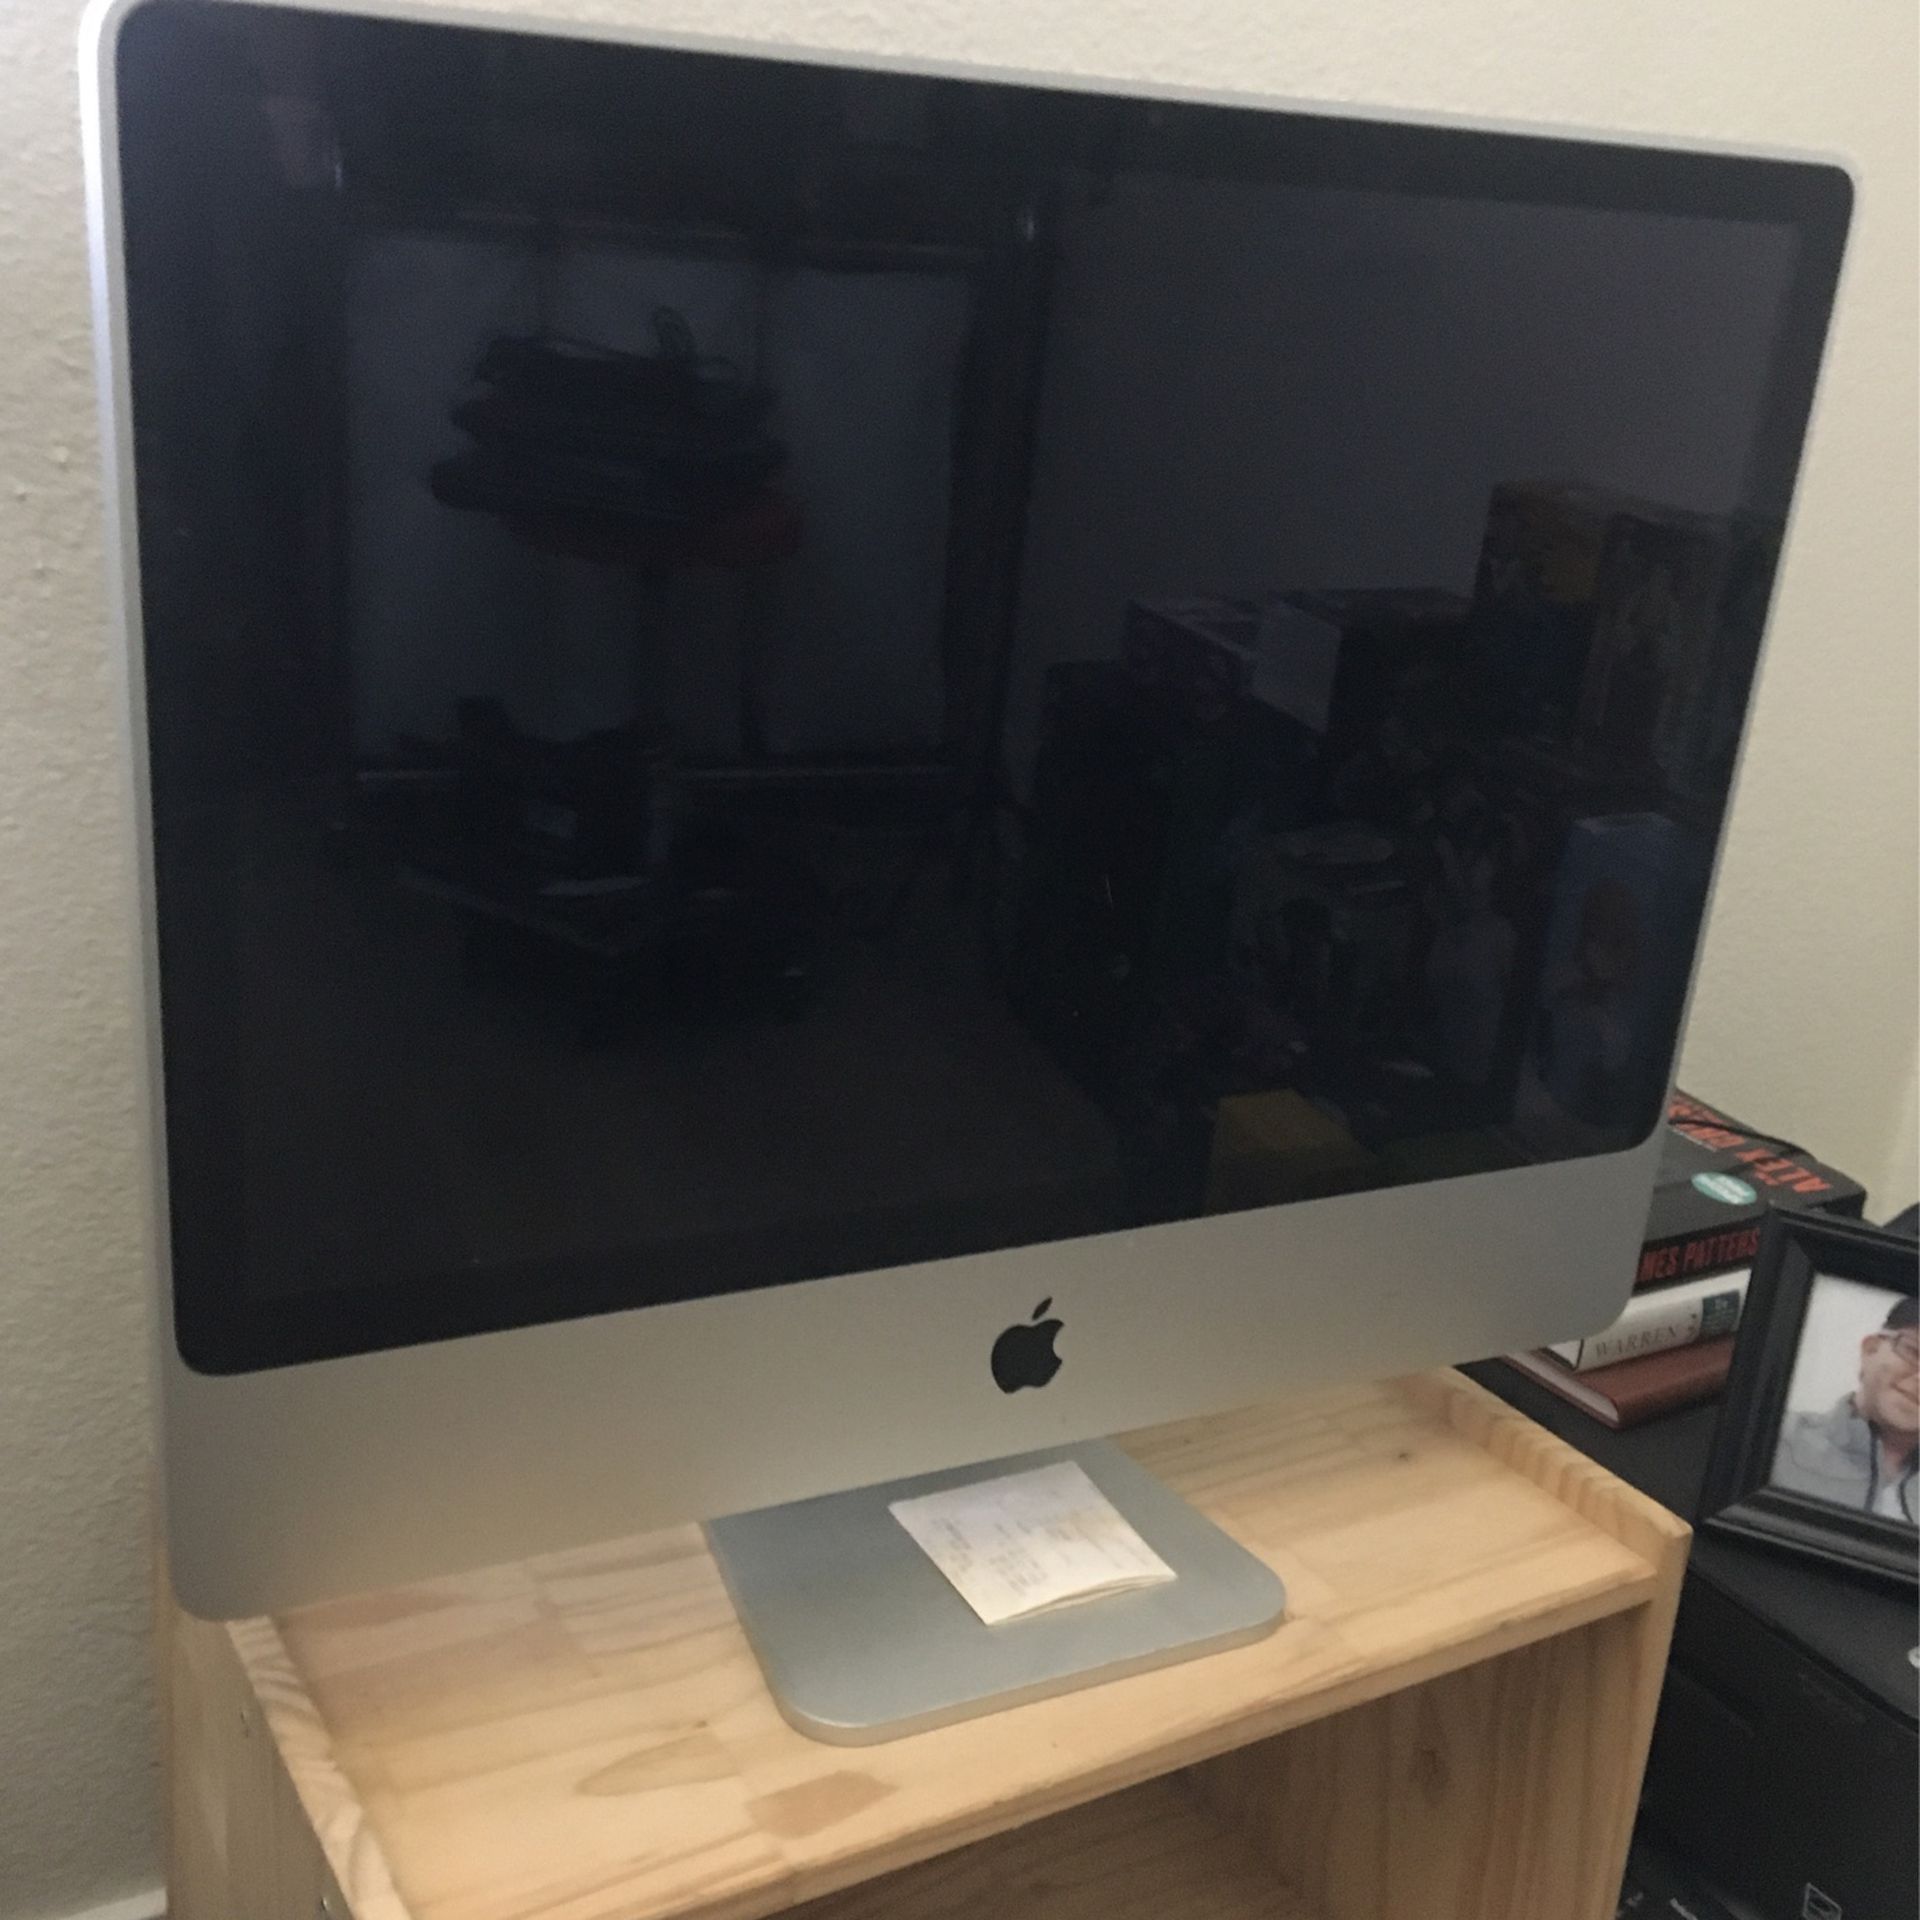 iMac 24” Silver Wireless Keyboard And Mouse Included